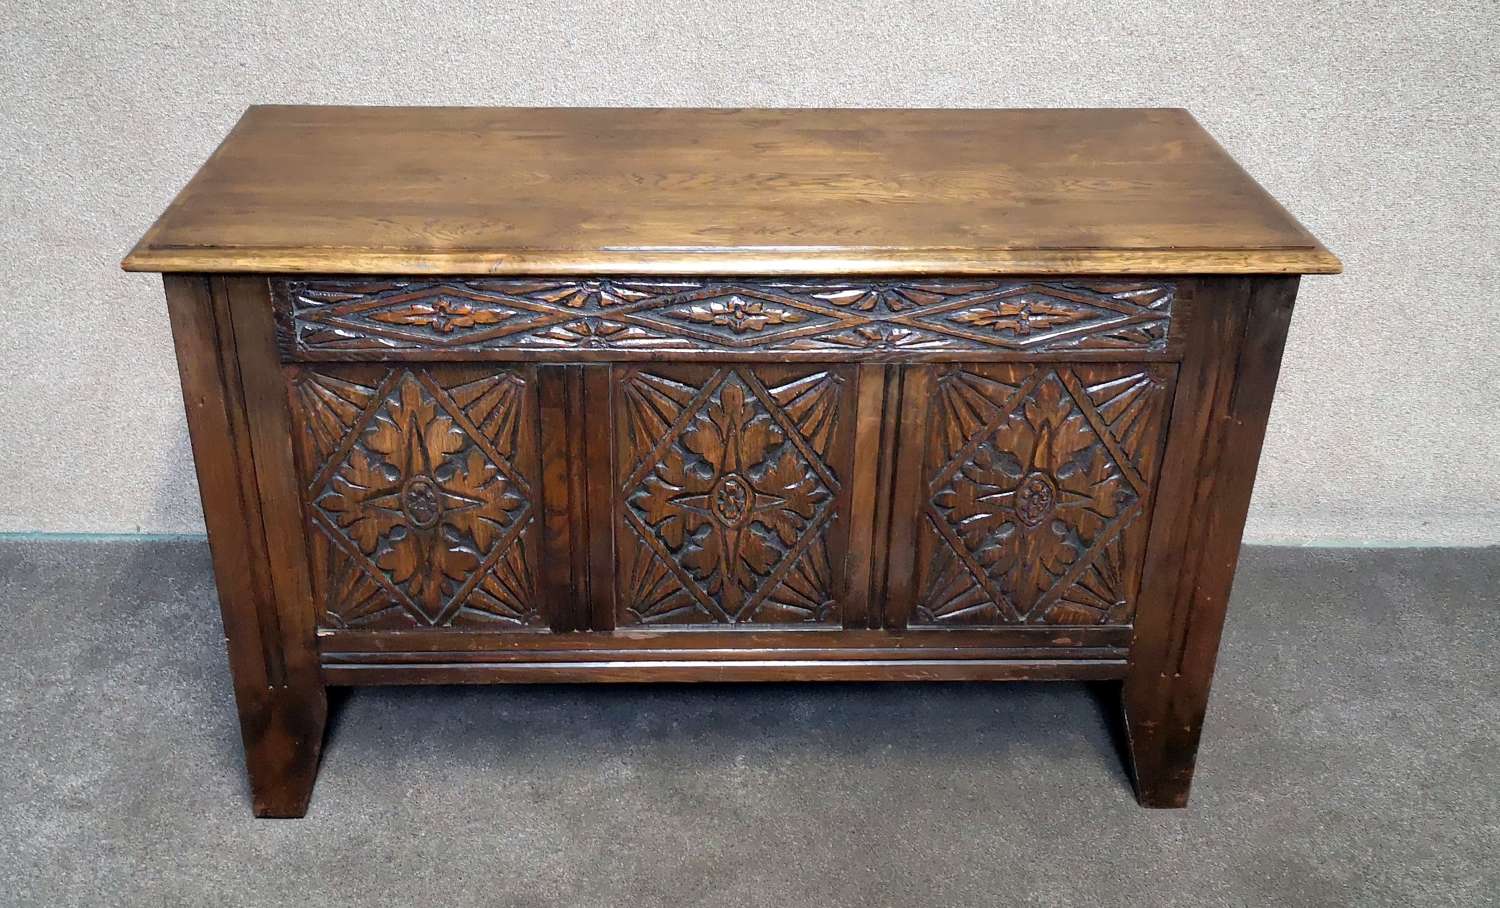 Oak Blanket Box Featuring Carved Decoration